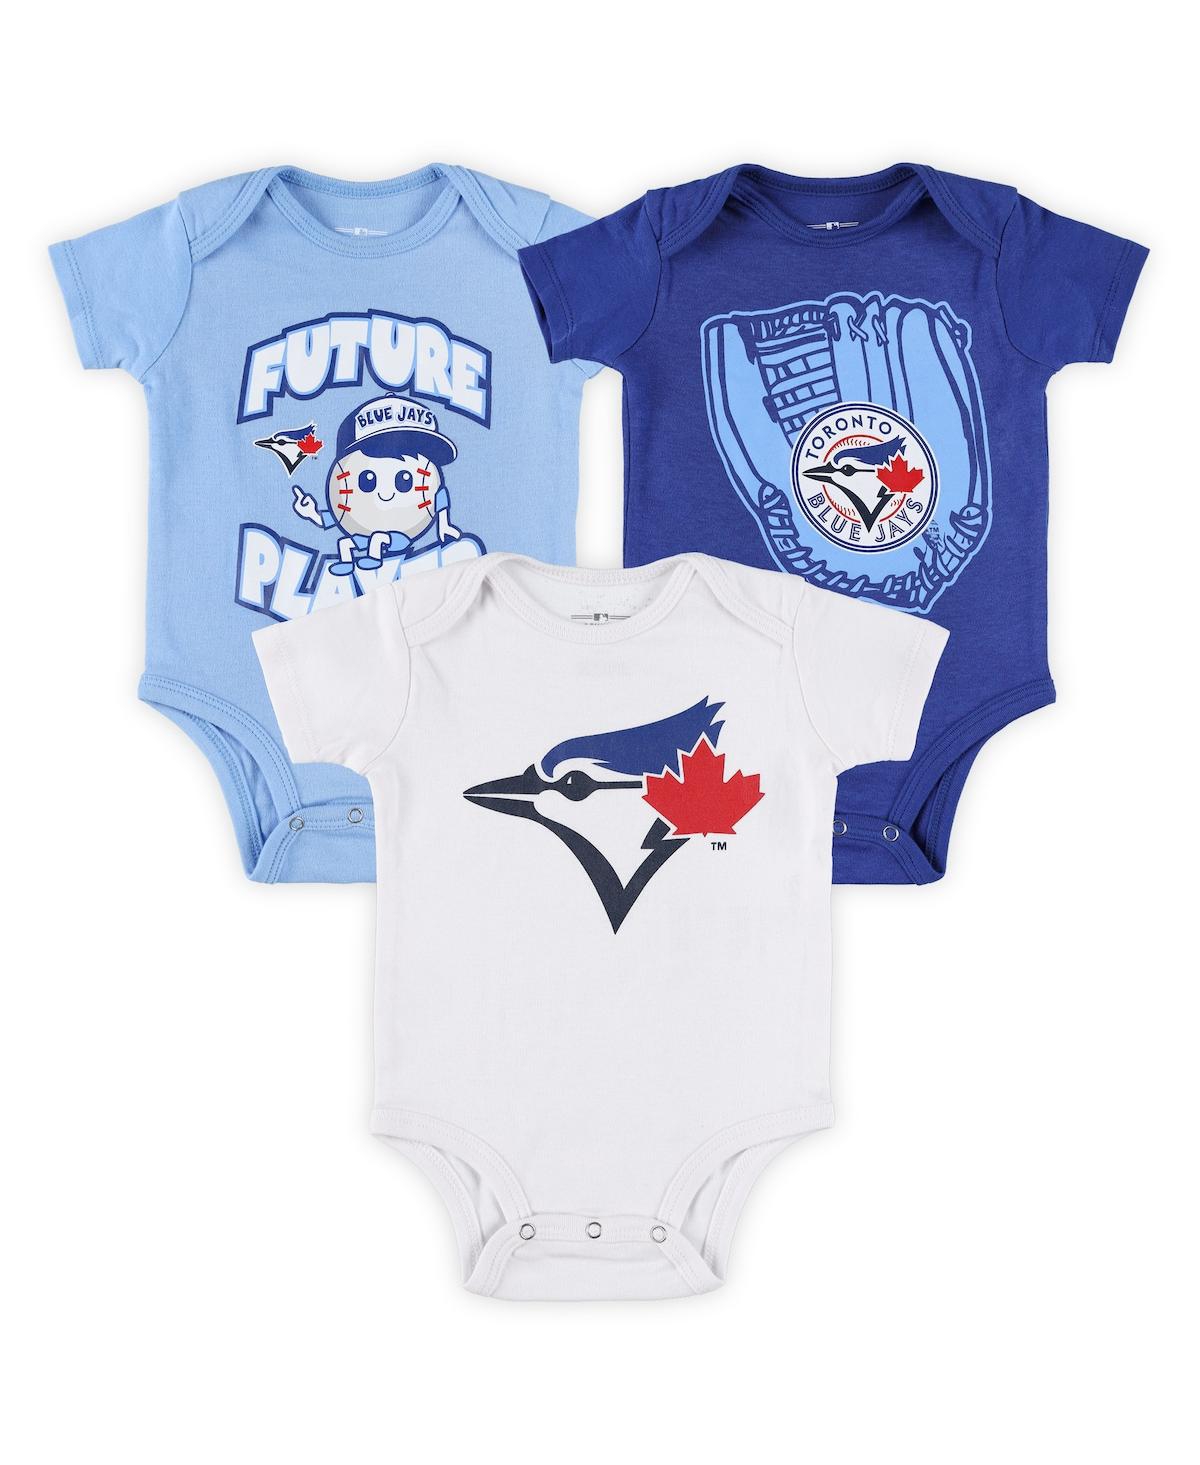 Outerstuff Babies' Newborn And Infant Boys And Girls Royal, Powder Blue, White Toronto Blue Jays Minor League Player Th In Royal,powder Blue,white